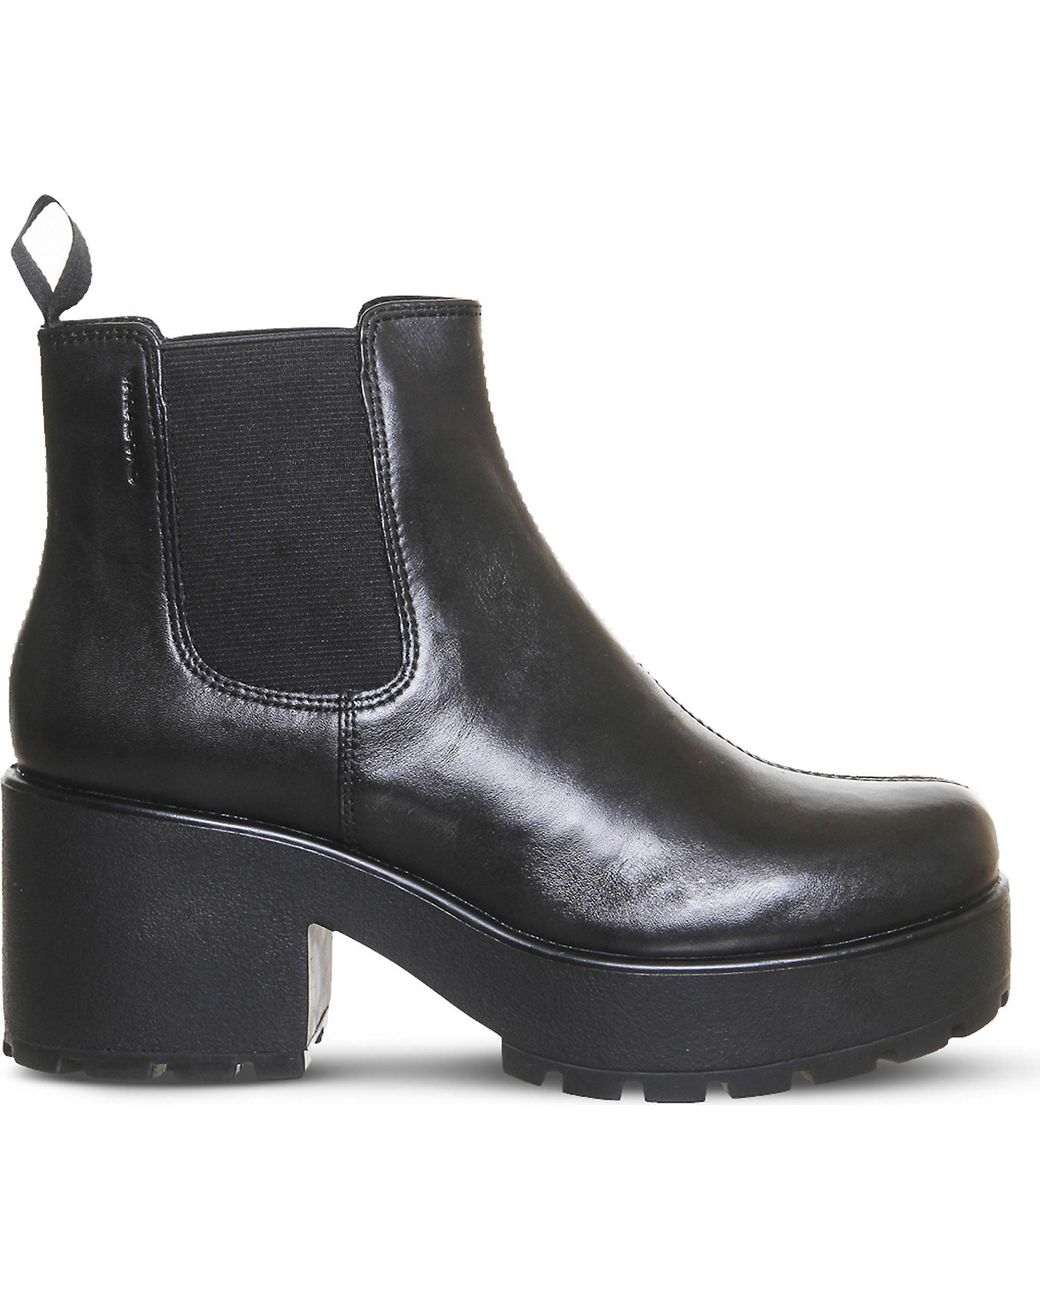 Vagabond Shoemakers Dioon Chunky Leather Boots in Black Lyst